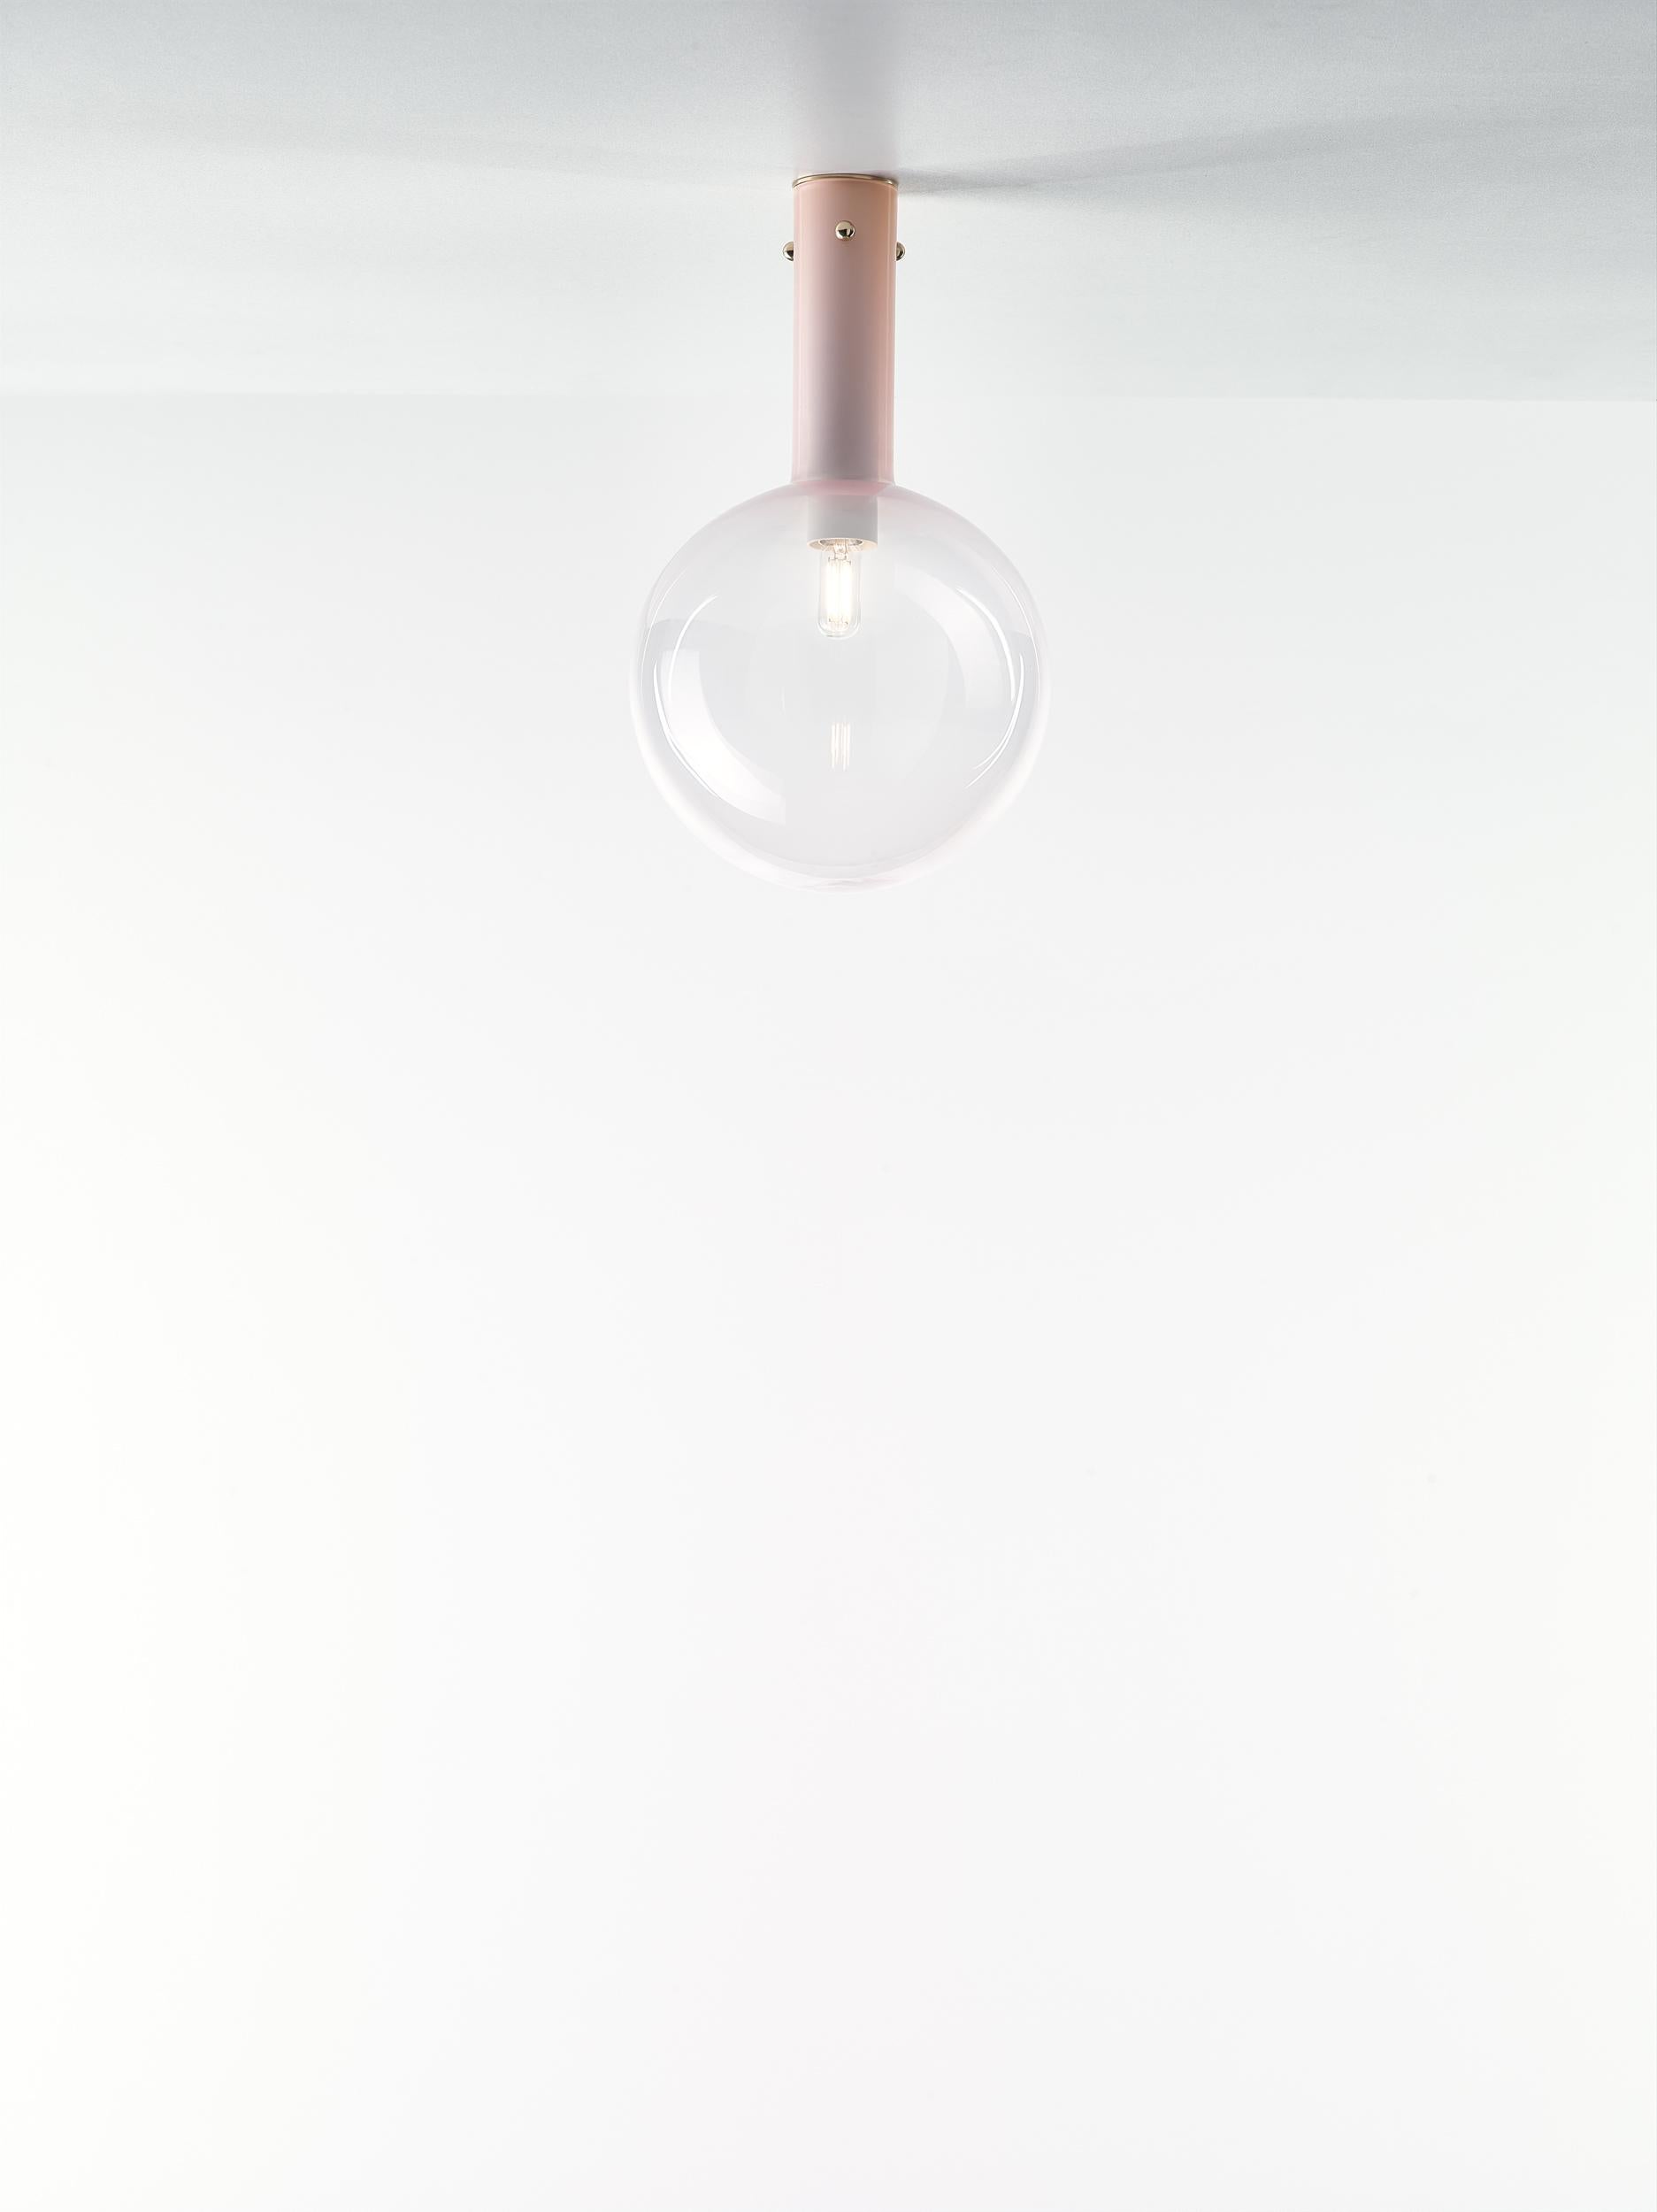 Pink Sphaerae surface light by Dechem Studio
Dimensions: D 20 x H 180 cm
Materials: brass, metal, glass.
Also available: different finishes and colors available.
Only one homogenous piece of hand blown glass creates the main body of Sphaerae